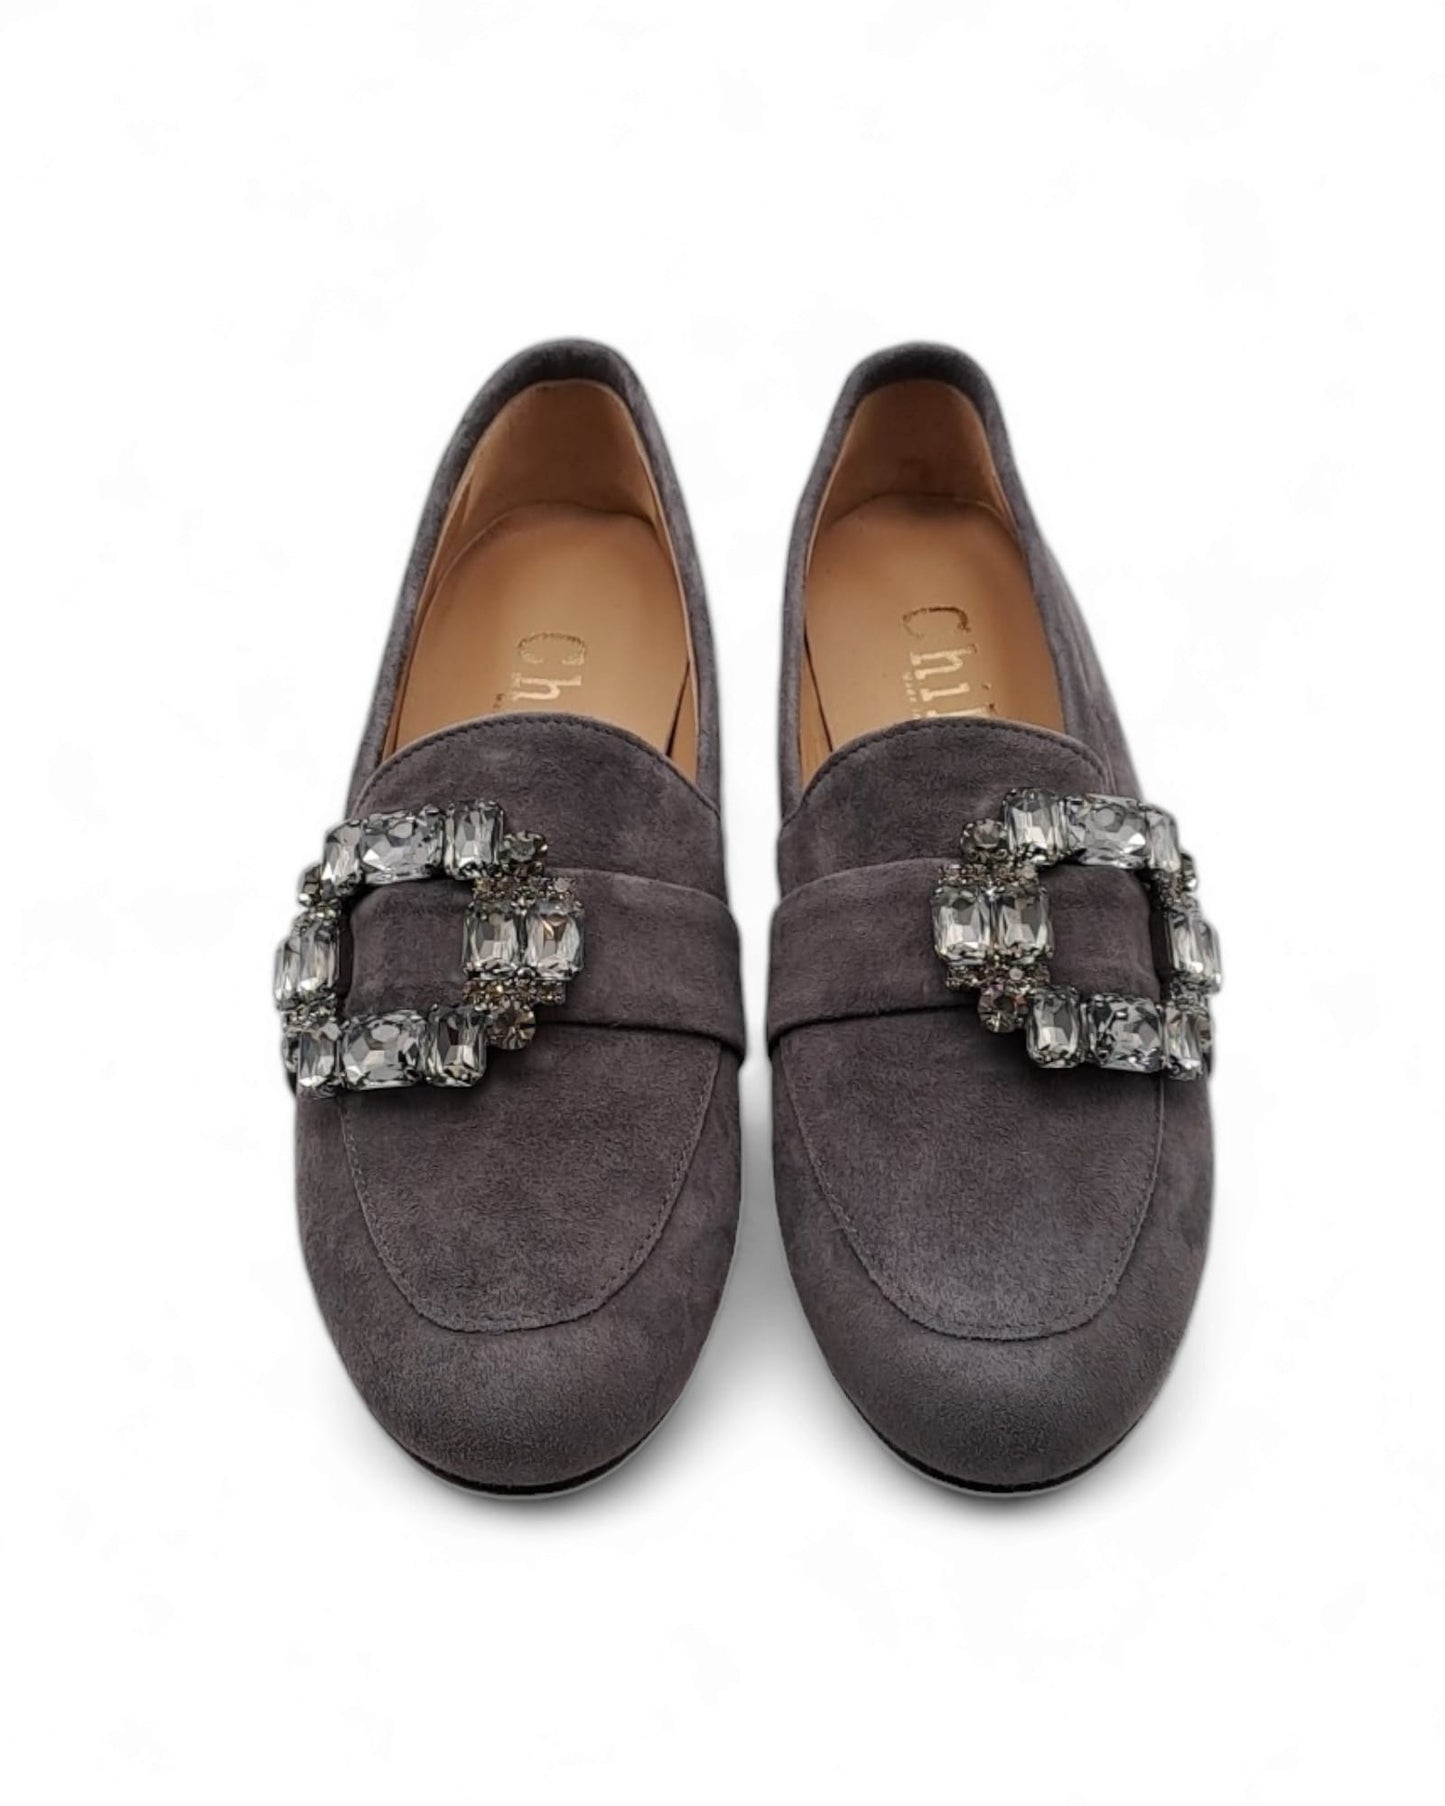 Gray Suede Moccasin with Crystal